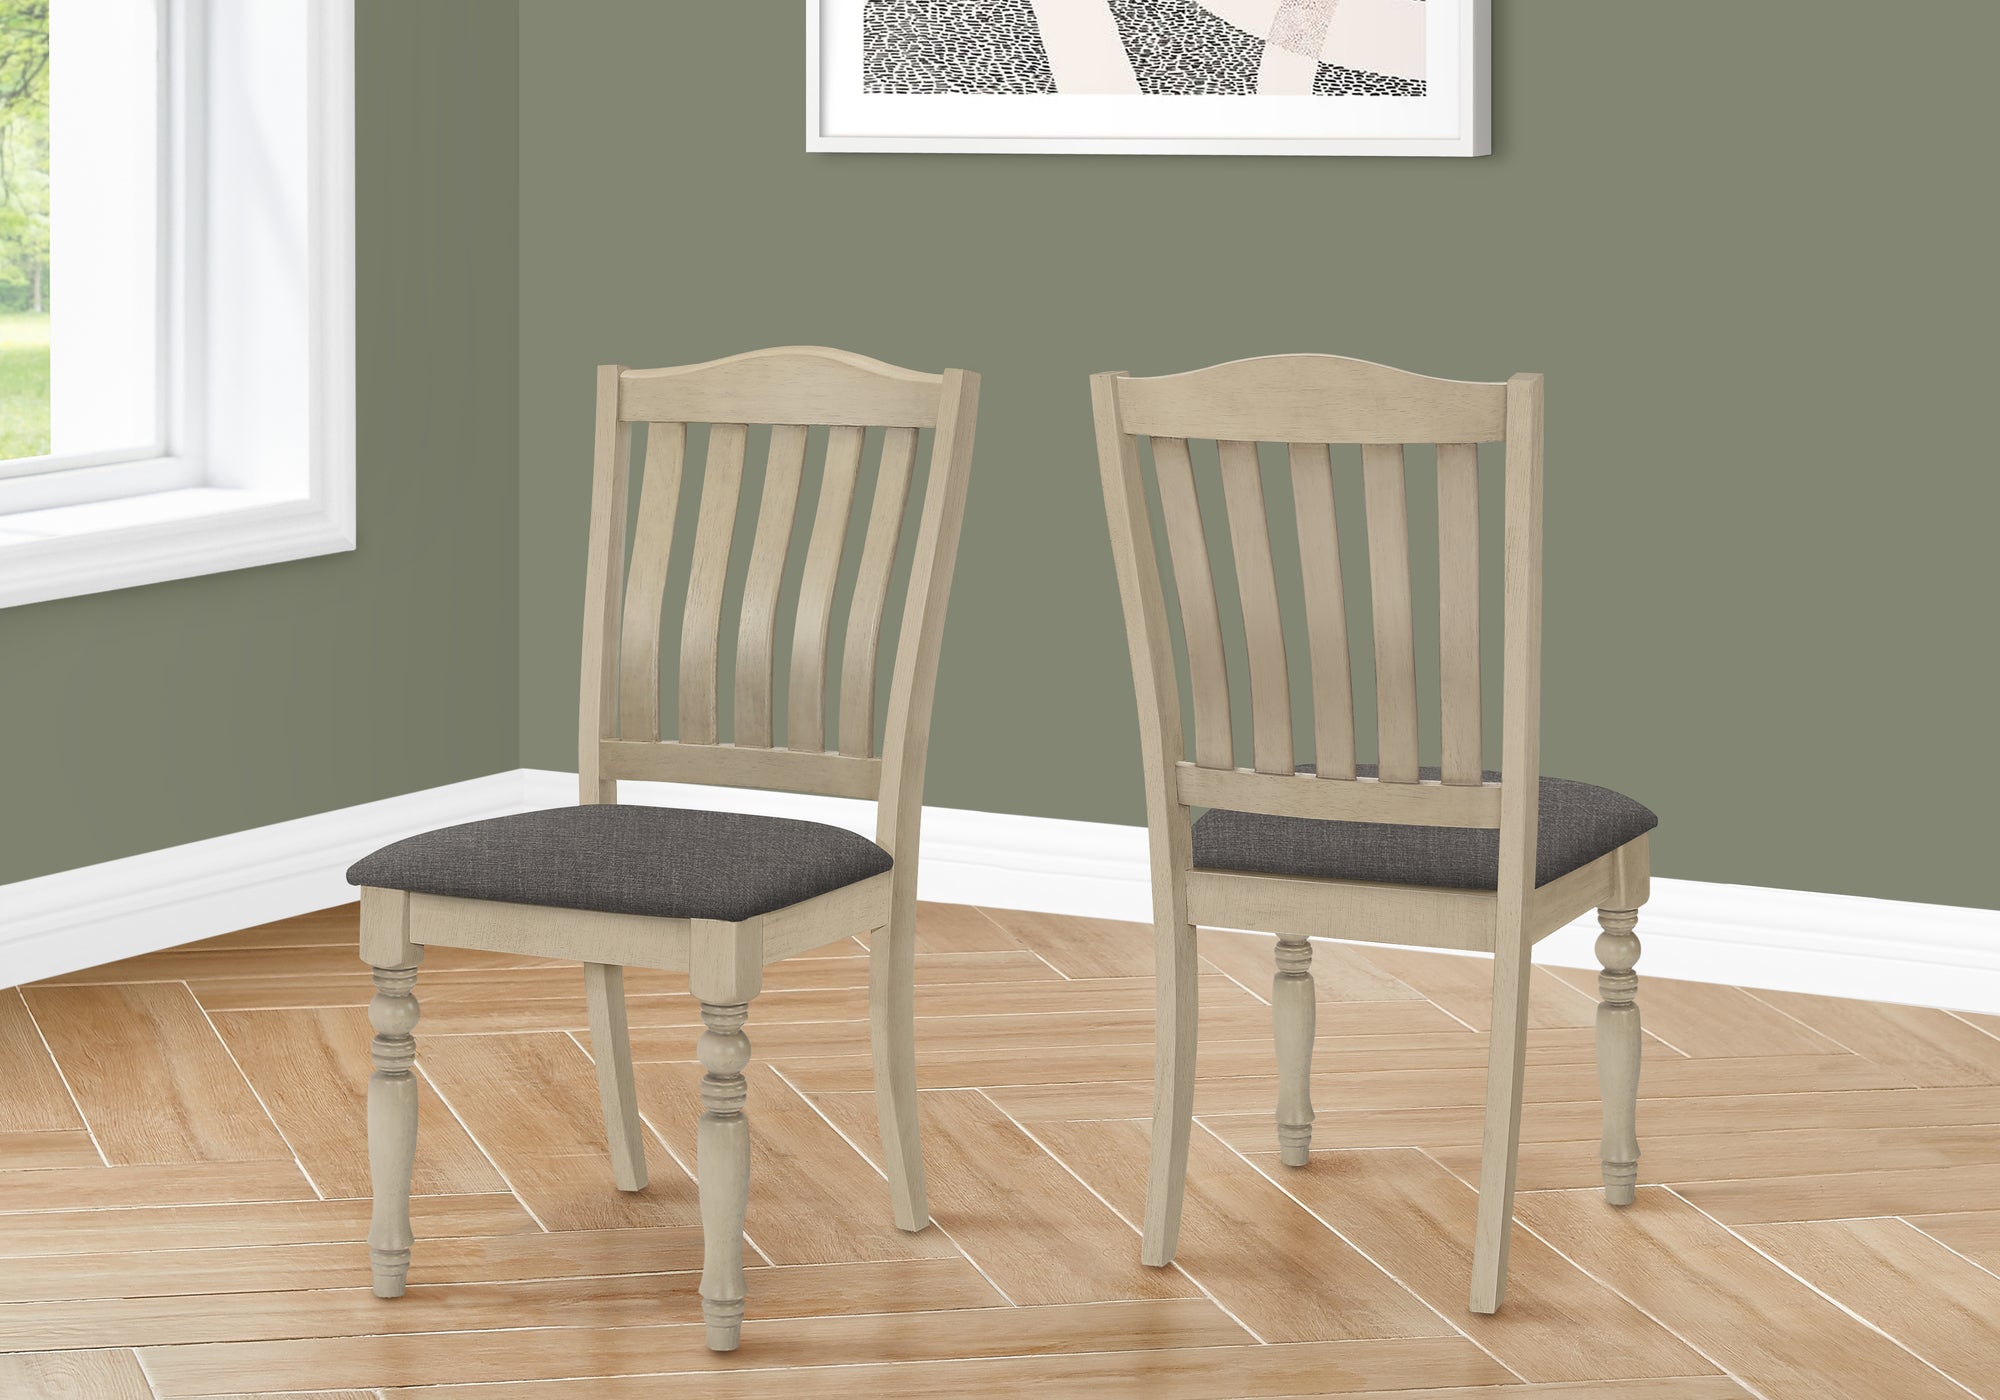 MN-411392    Dining Chair, 39" Height, Set Of 2, Upholstered, Dining Room, Kitchen, Side, Antique Grey, Grey Fabric, Wood Legs, Transitional